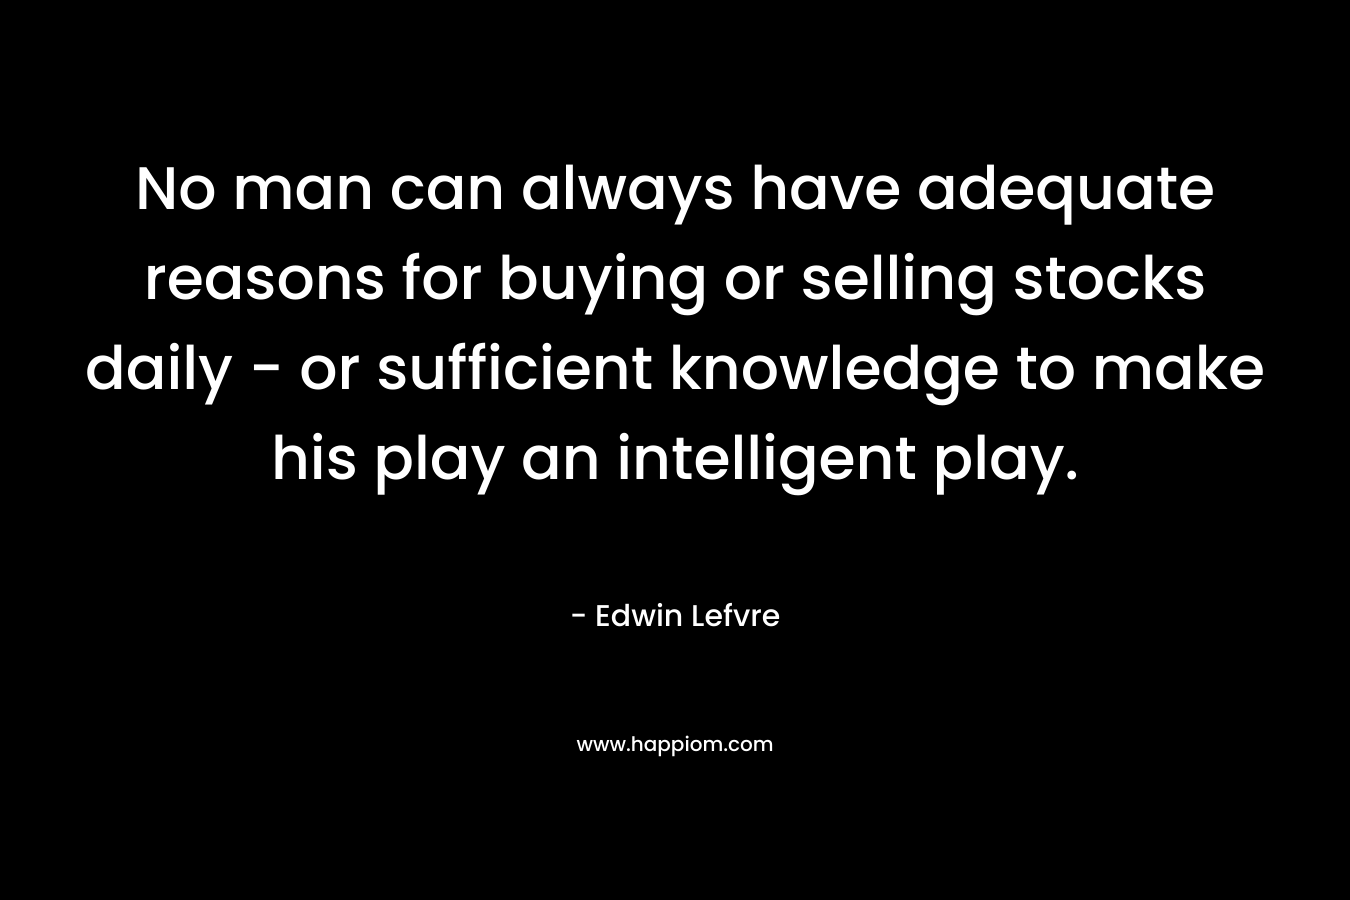 No man can always have adequate reasons for buying or selling stocks daily – or sufficient knowledge to make his play an intelligent play. – Edwin Lefvre